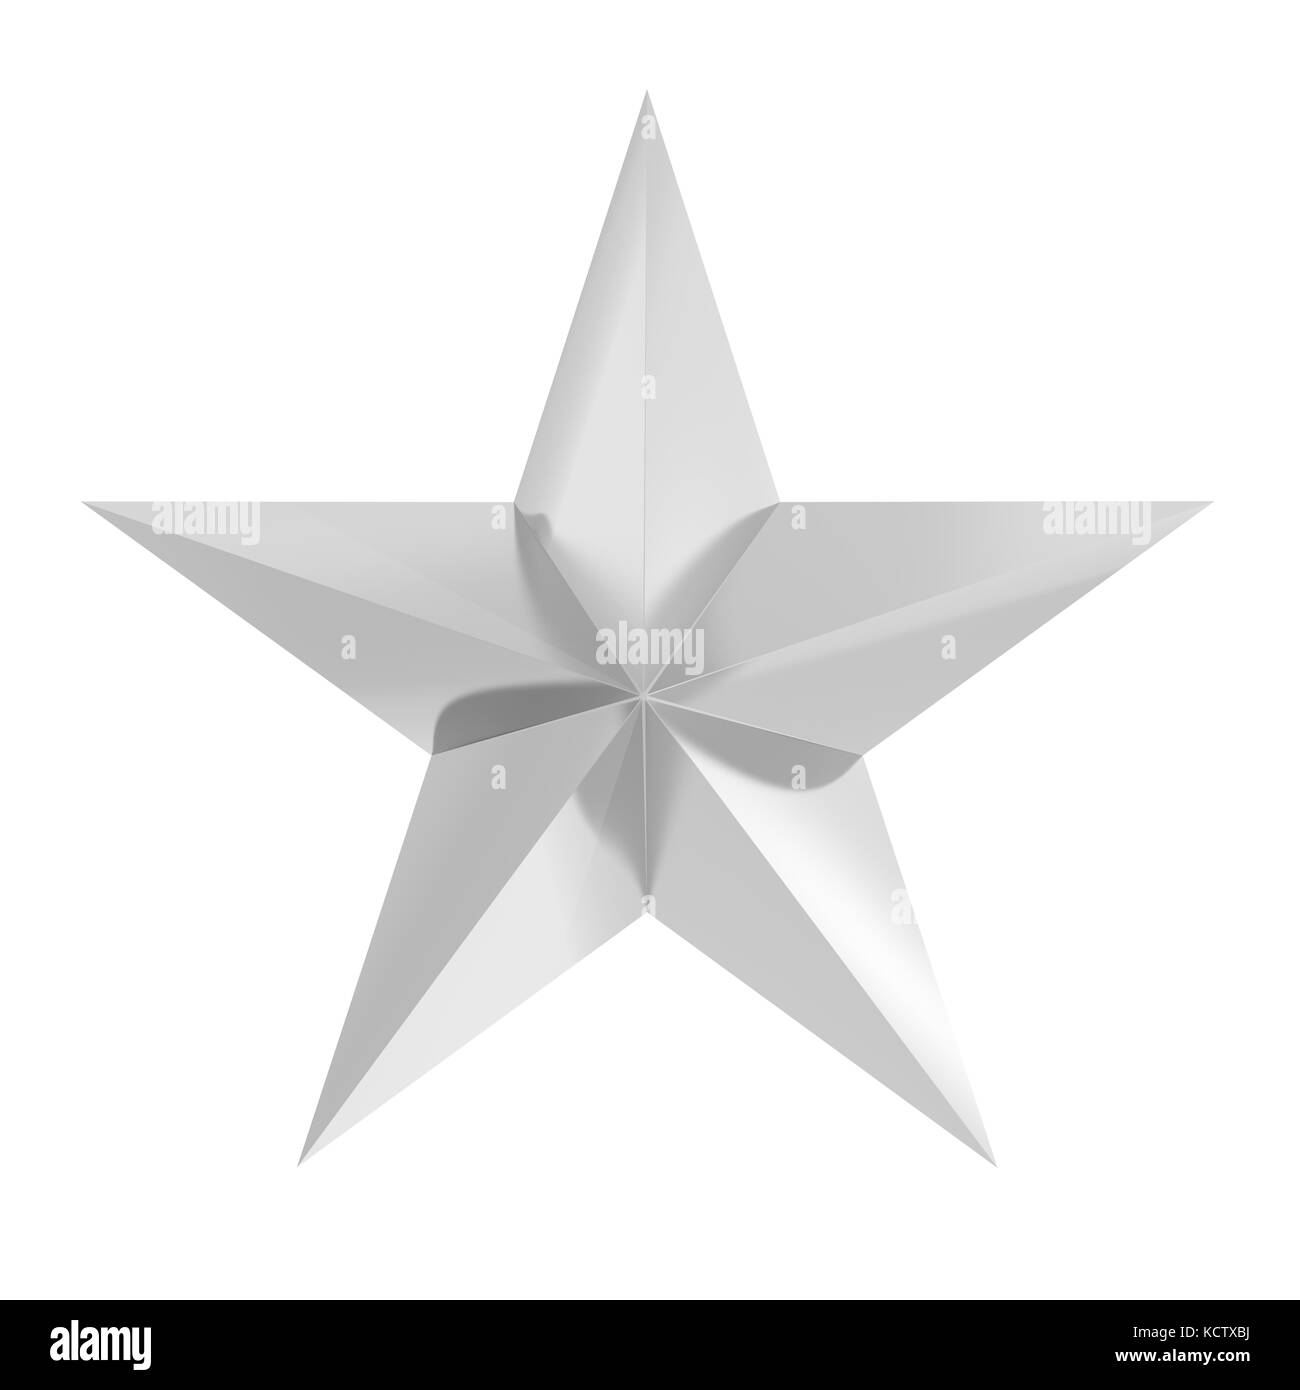 Silver star icon,isolated on white background Stock Photo